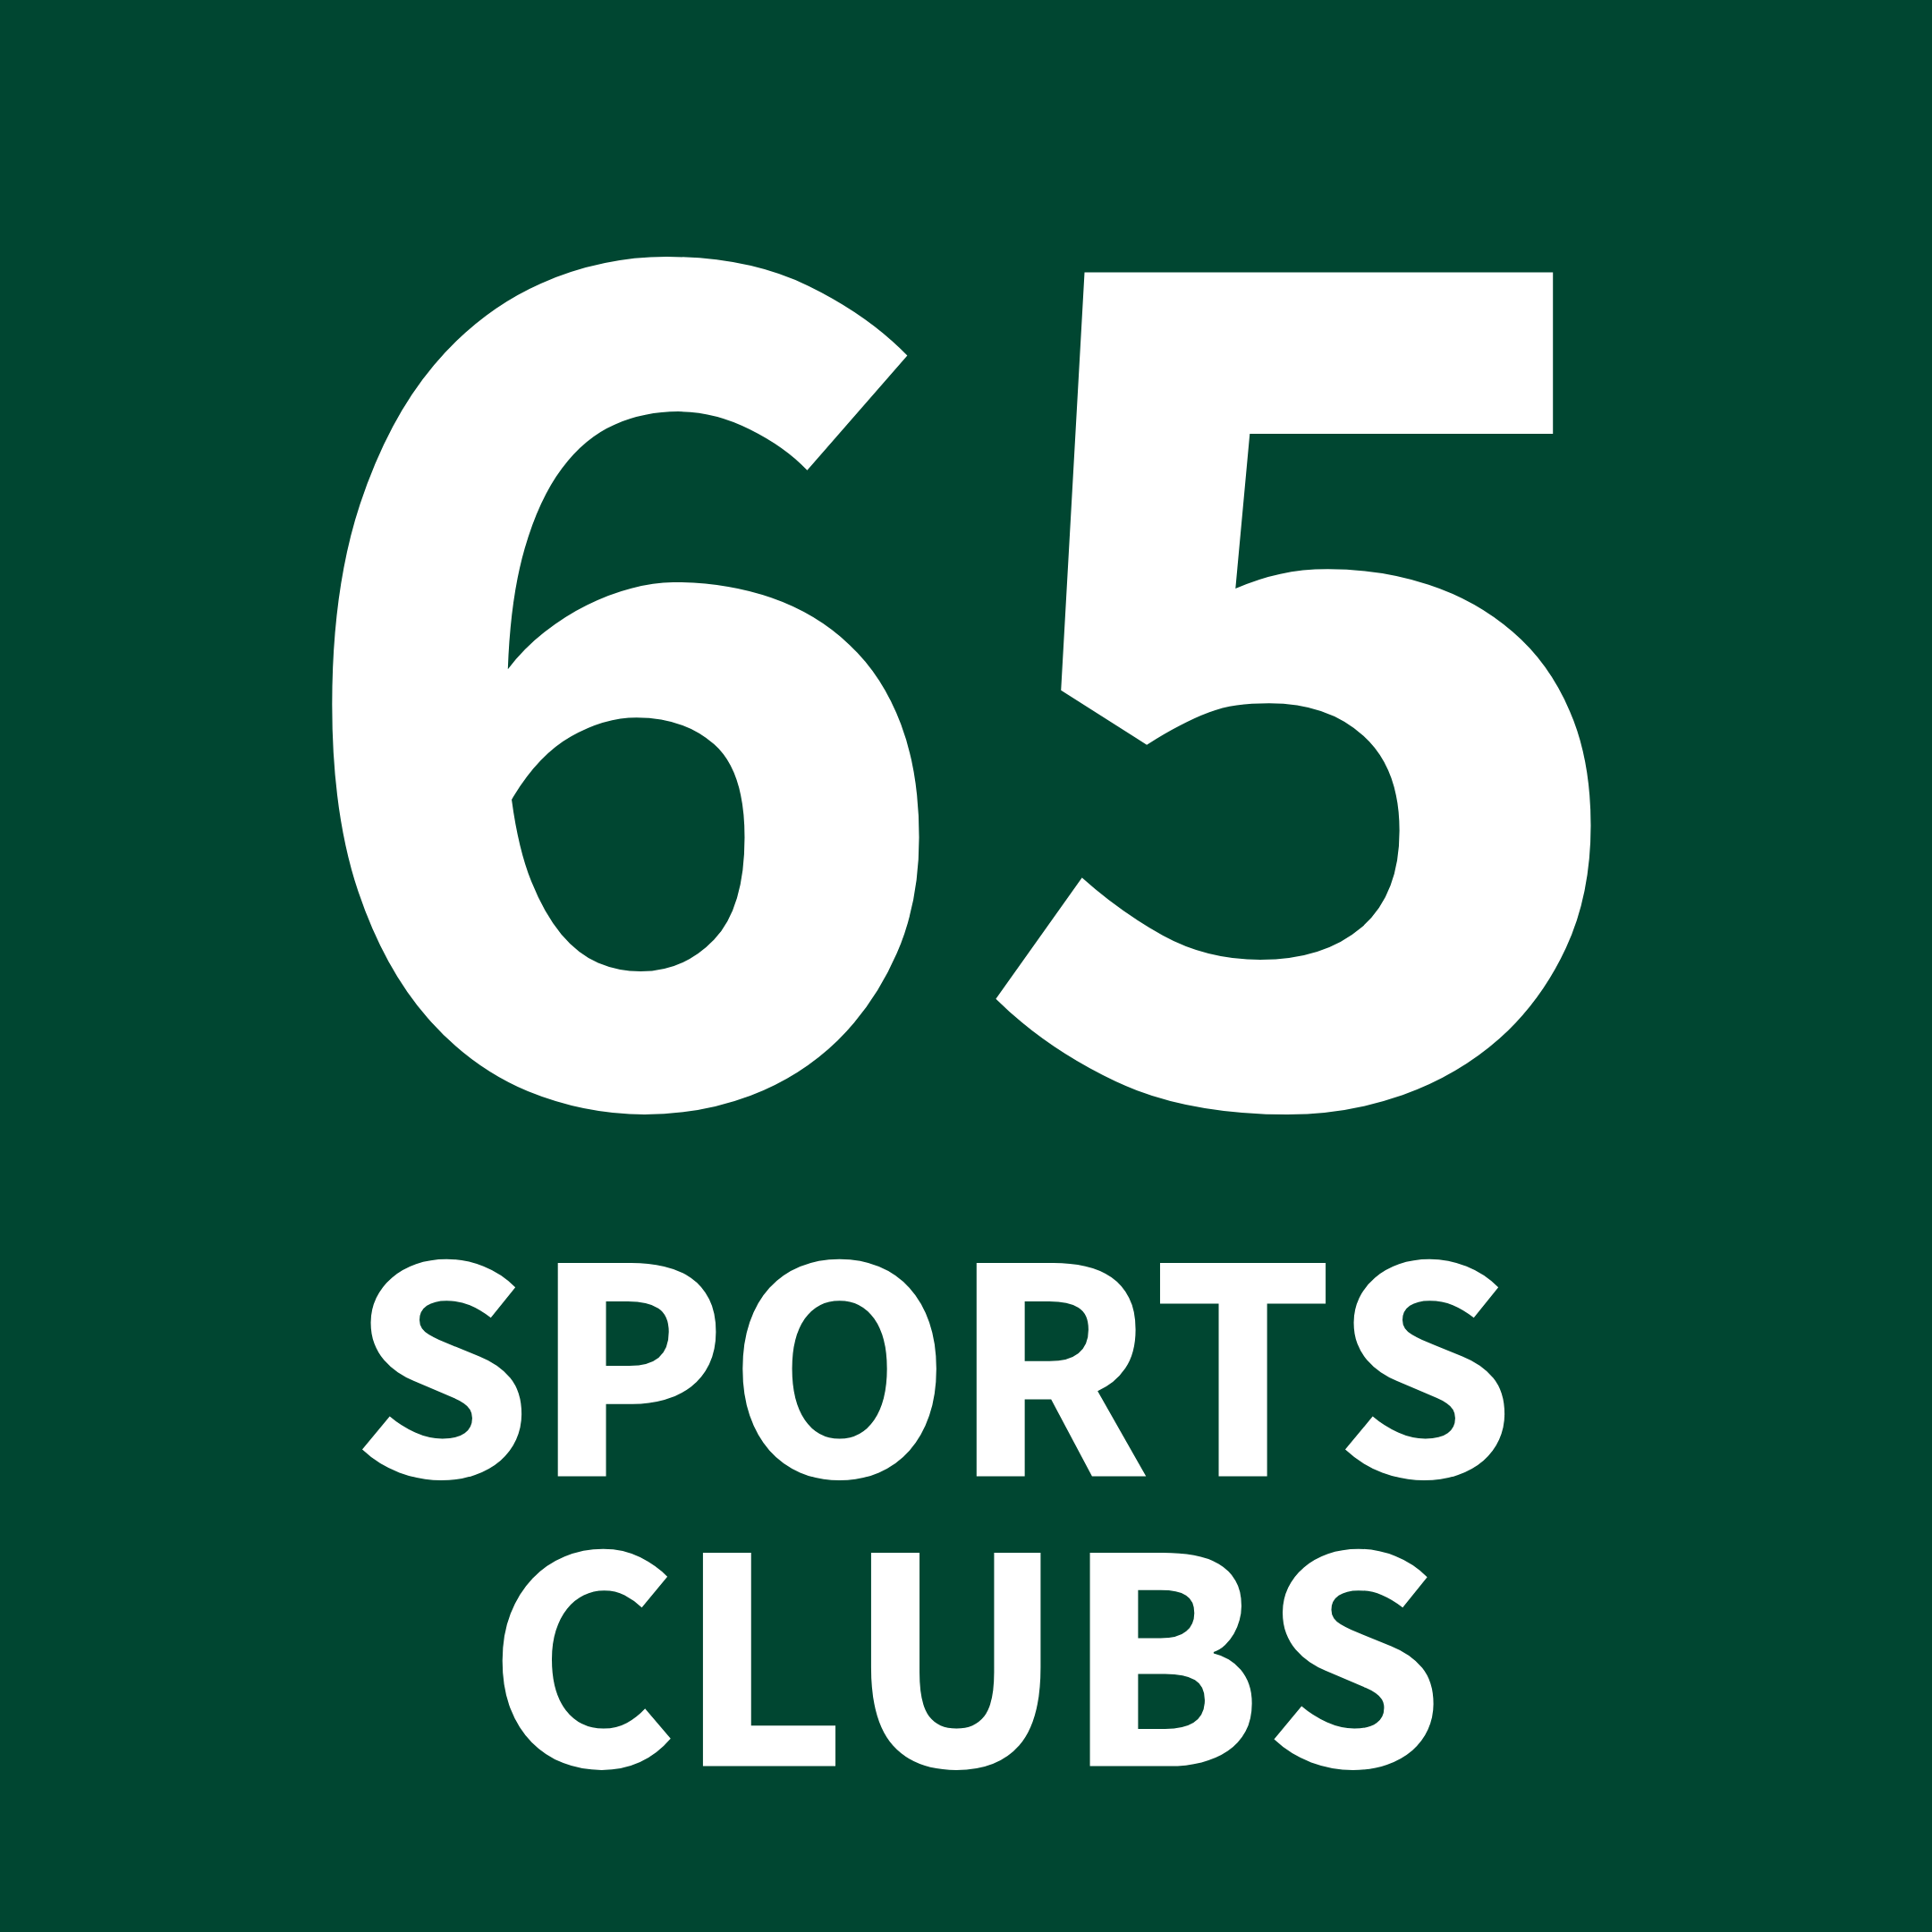 65 sports clubs